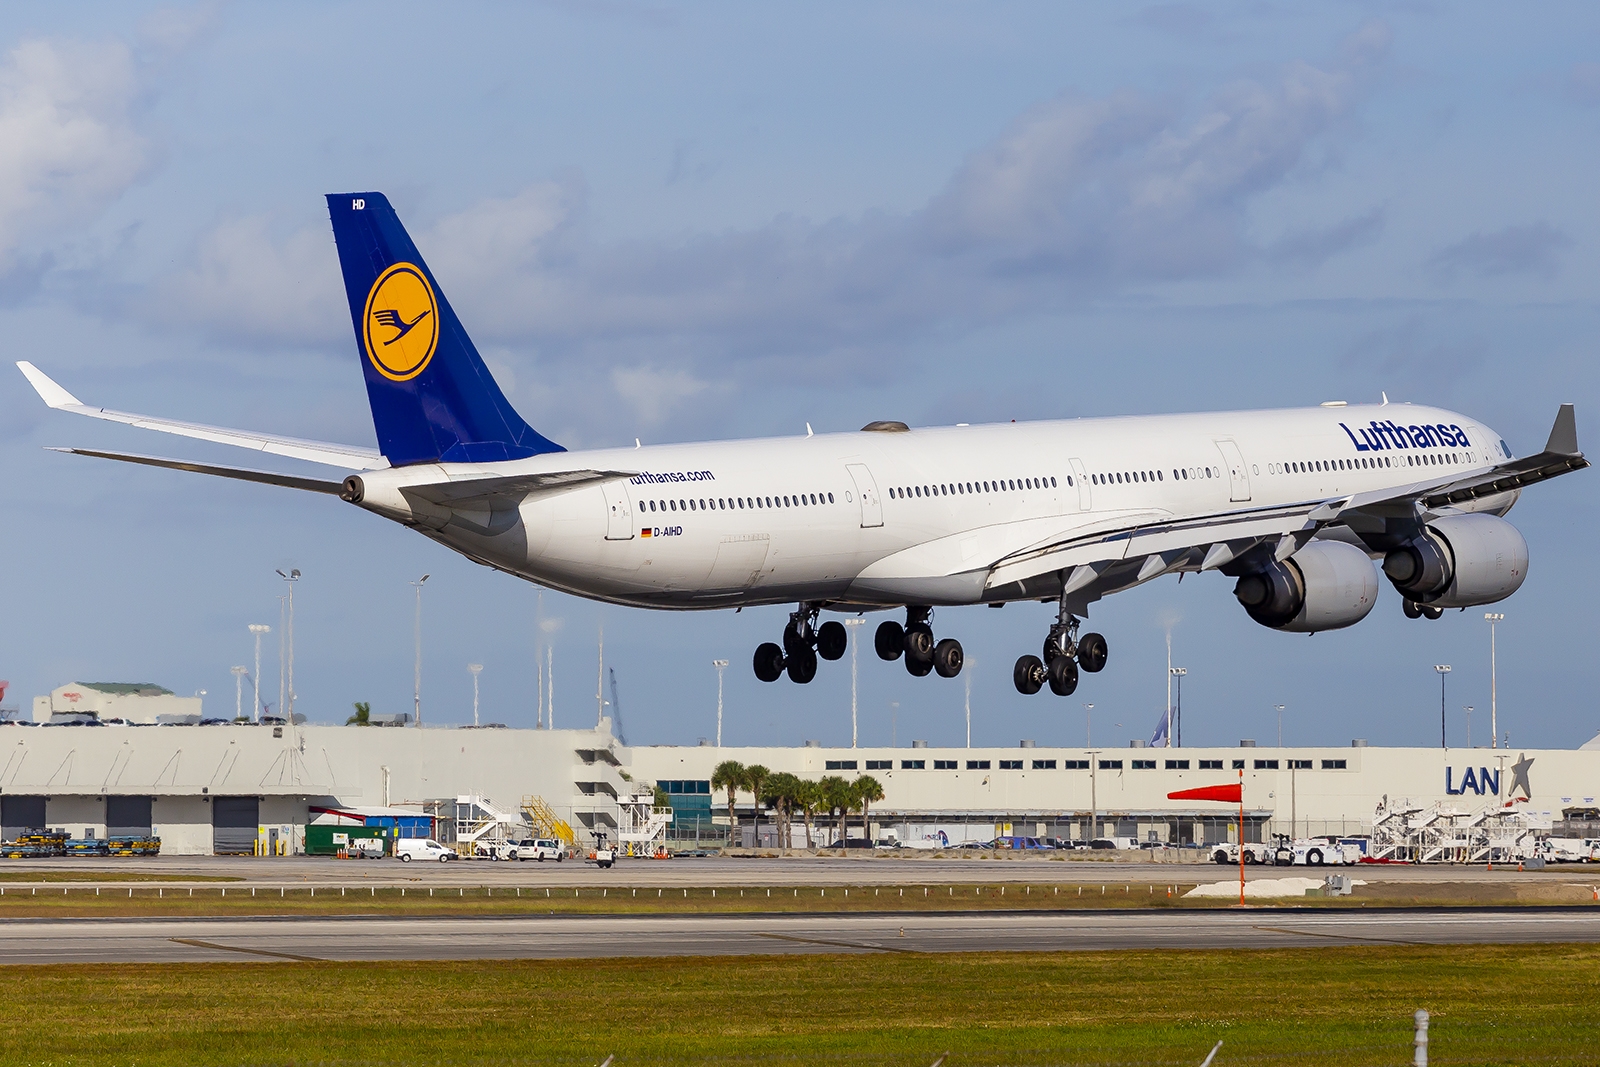 D-AIHD - Airbus A340-600